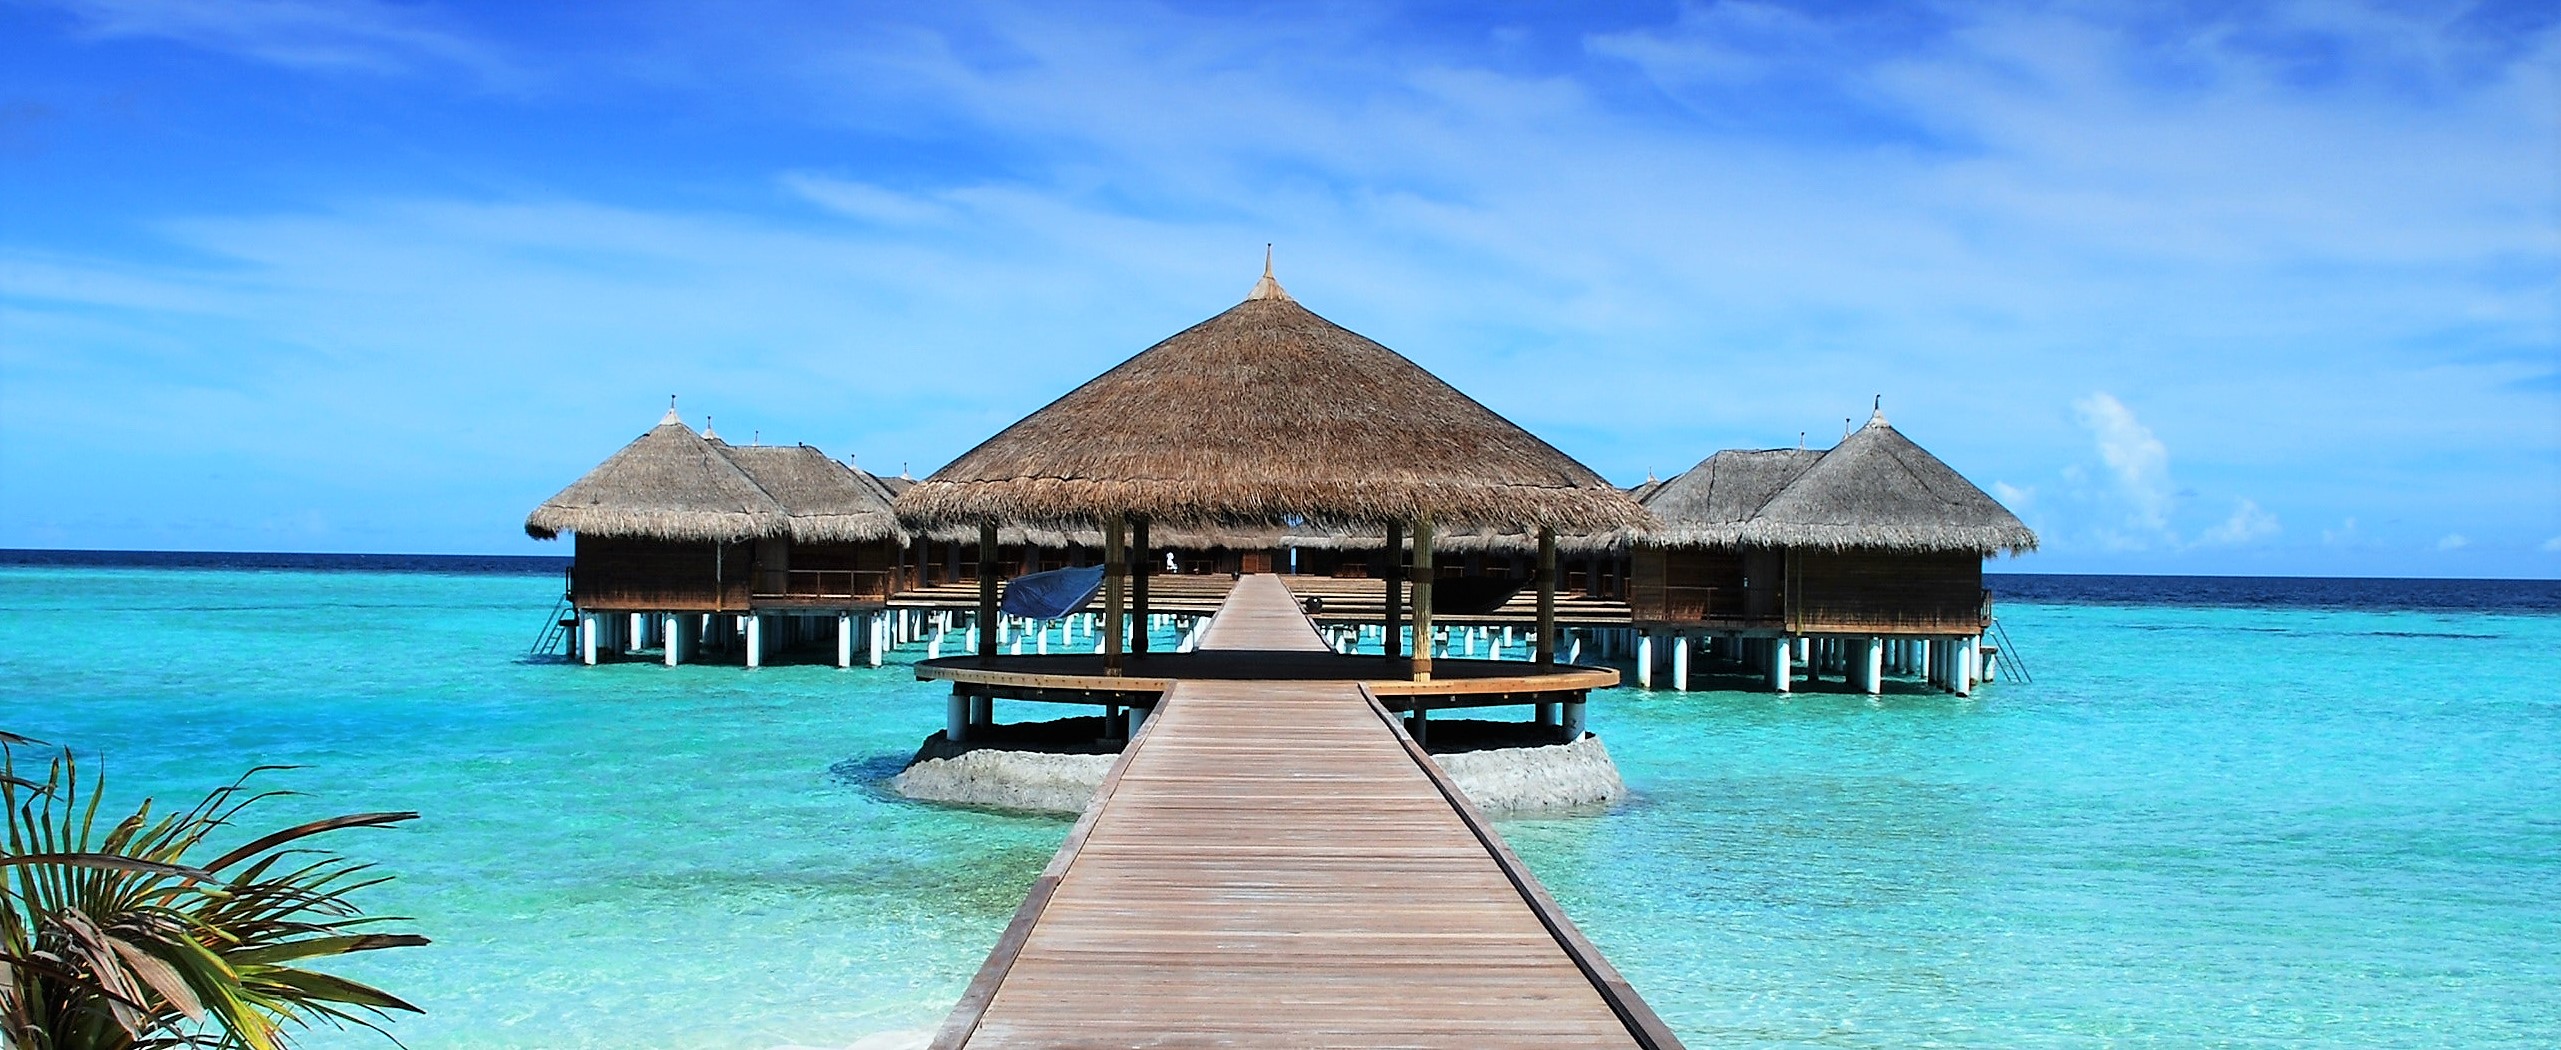 A wide and sturdy wood boardwalk leads from a soft sandy beach strait to a series of circular and open bungalows set on stilts right in the bright turquoise ocean.